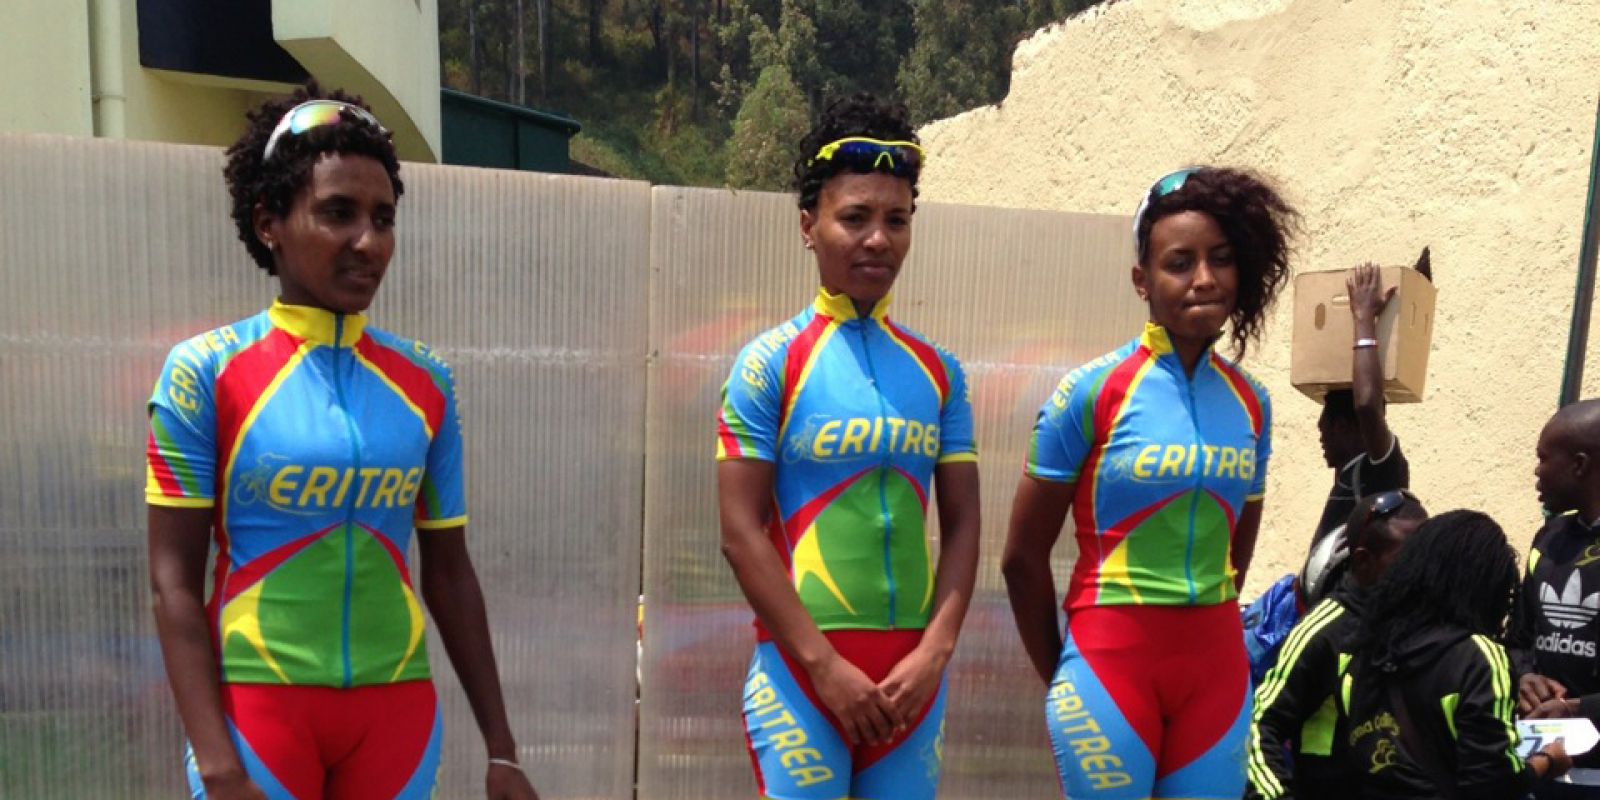 First ‪Eritrean‬ Female Cyclist to Race Professionally in the U.S